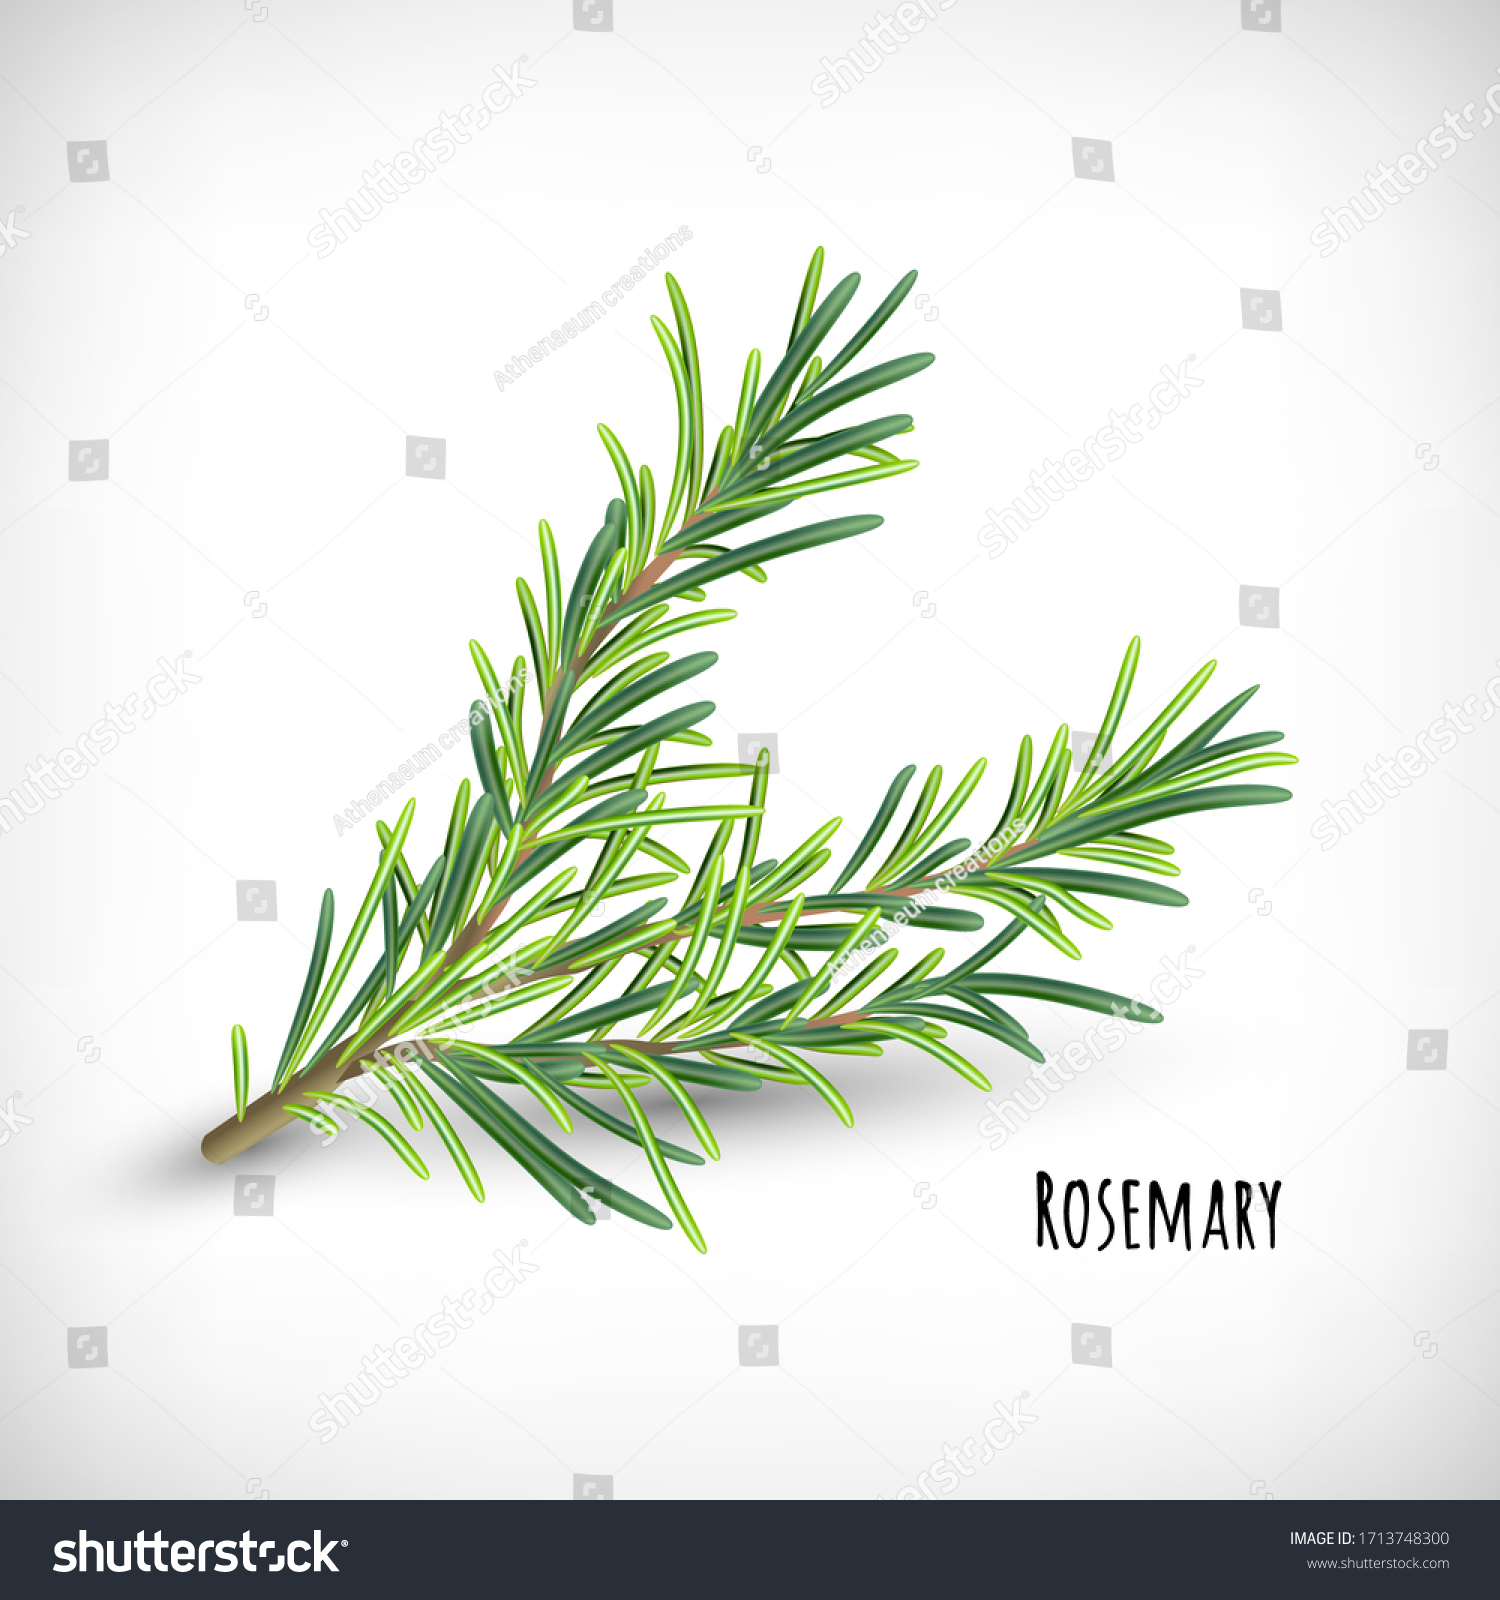 Rosemary plant. Spice herbs concept.  Isolated rosemary twig on vignette background. Lettering Rosemary. Herb and spice vector element for web design. Vector illustration. #1713748300